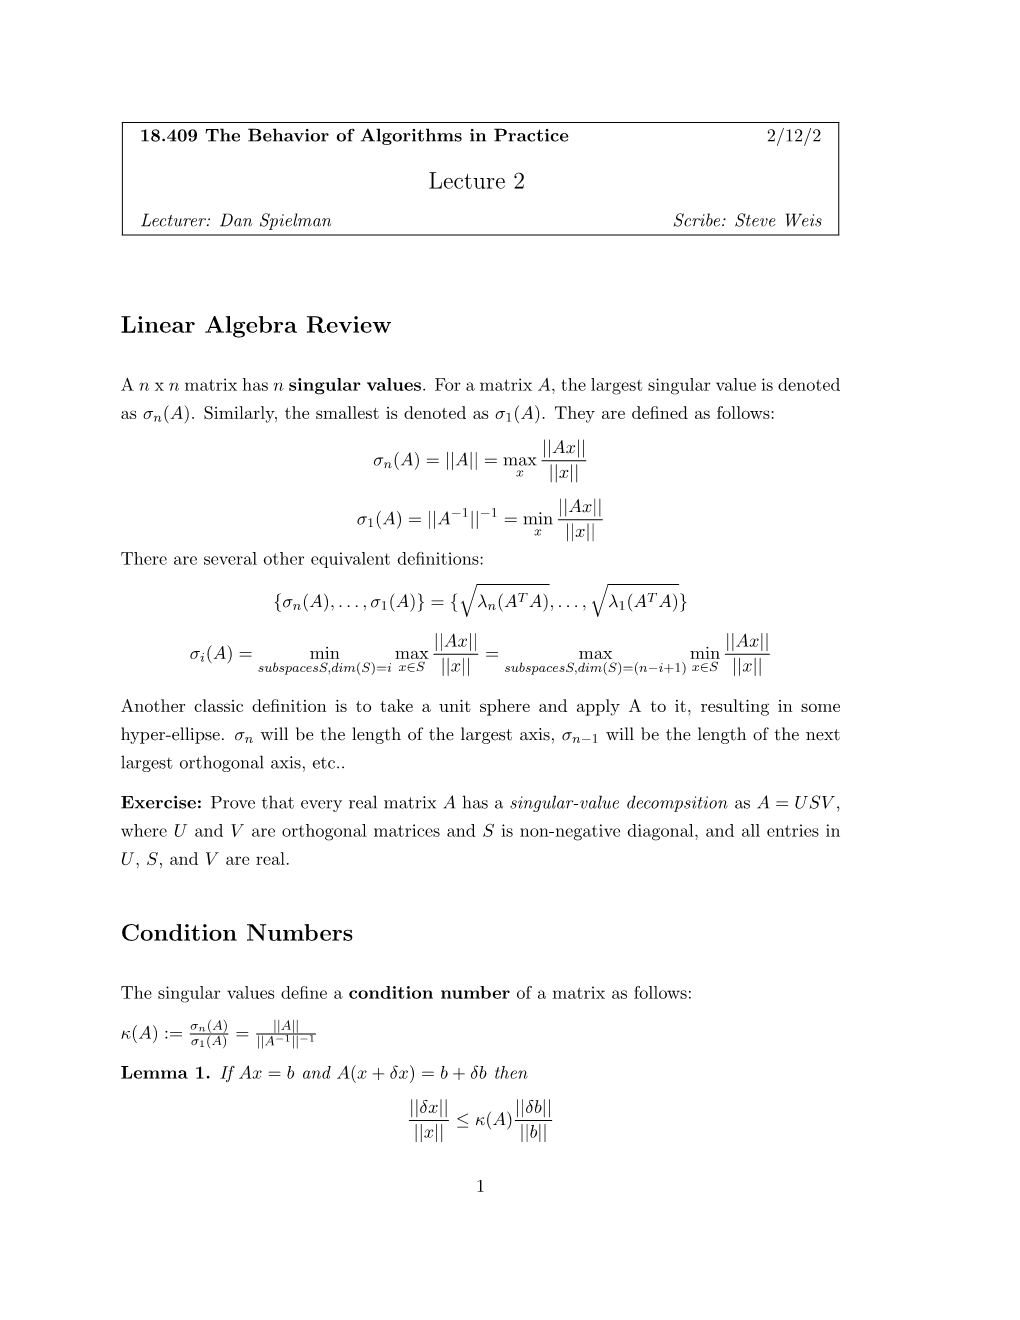 Lecture 2 Linear Algebra Review Condition Numbers